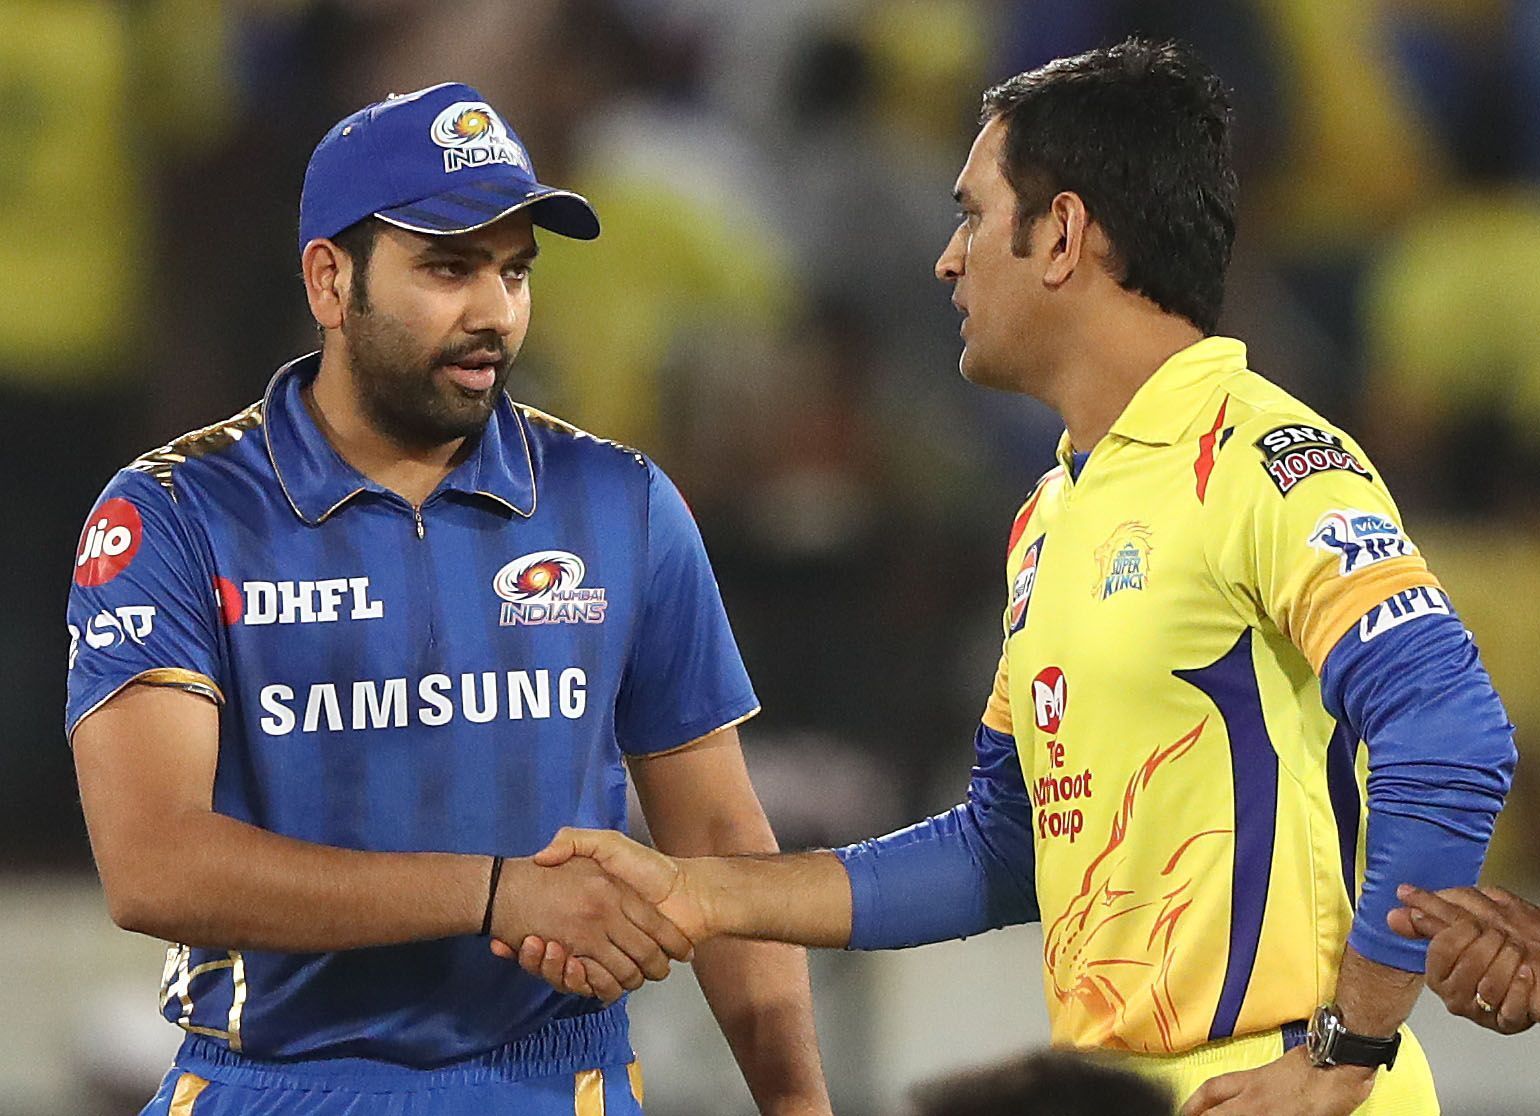 Rohit Sharma and MS Dhoni will go head-to-head one last time in IPL 2022